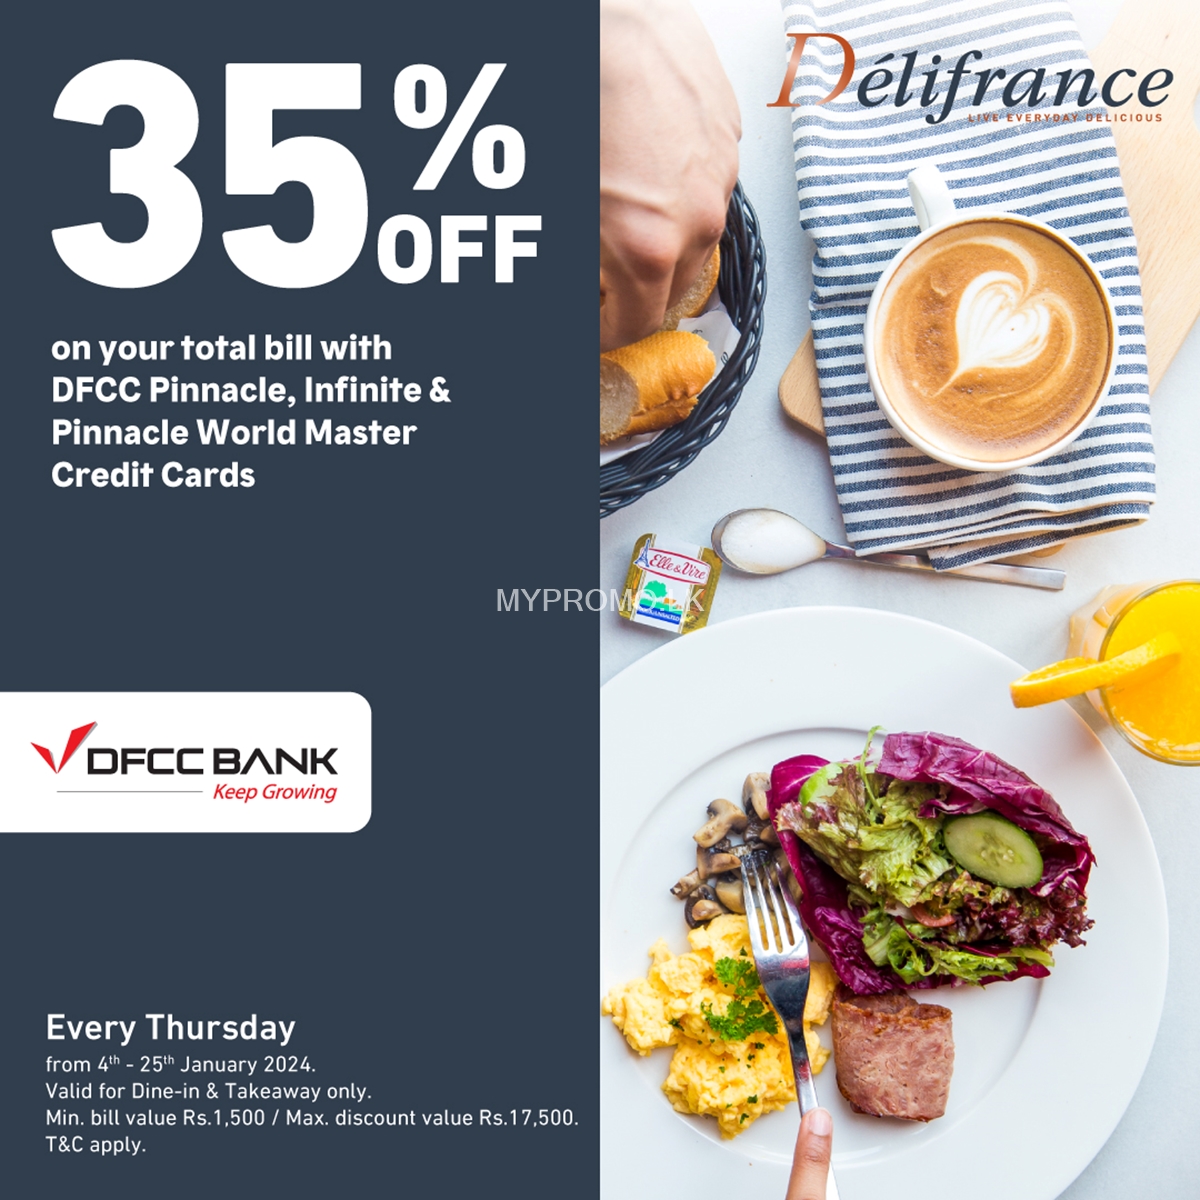 Exclusive Offer for DFCC Bank Credit Card Holders on Thursdays at Delifrance